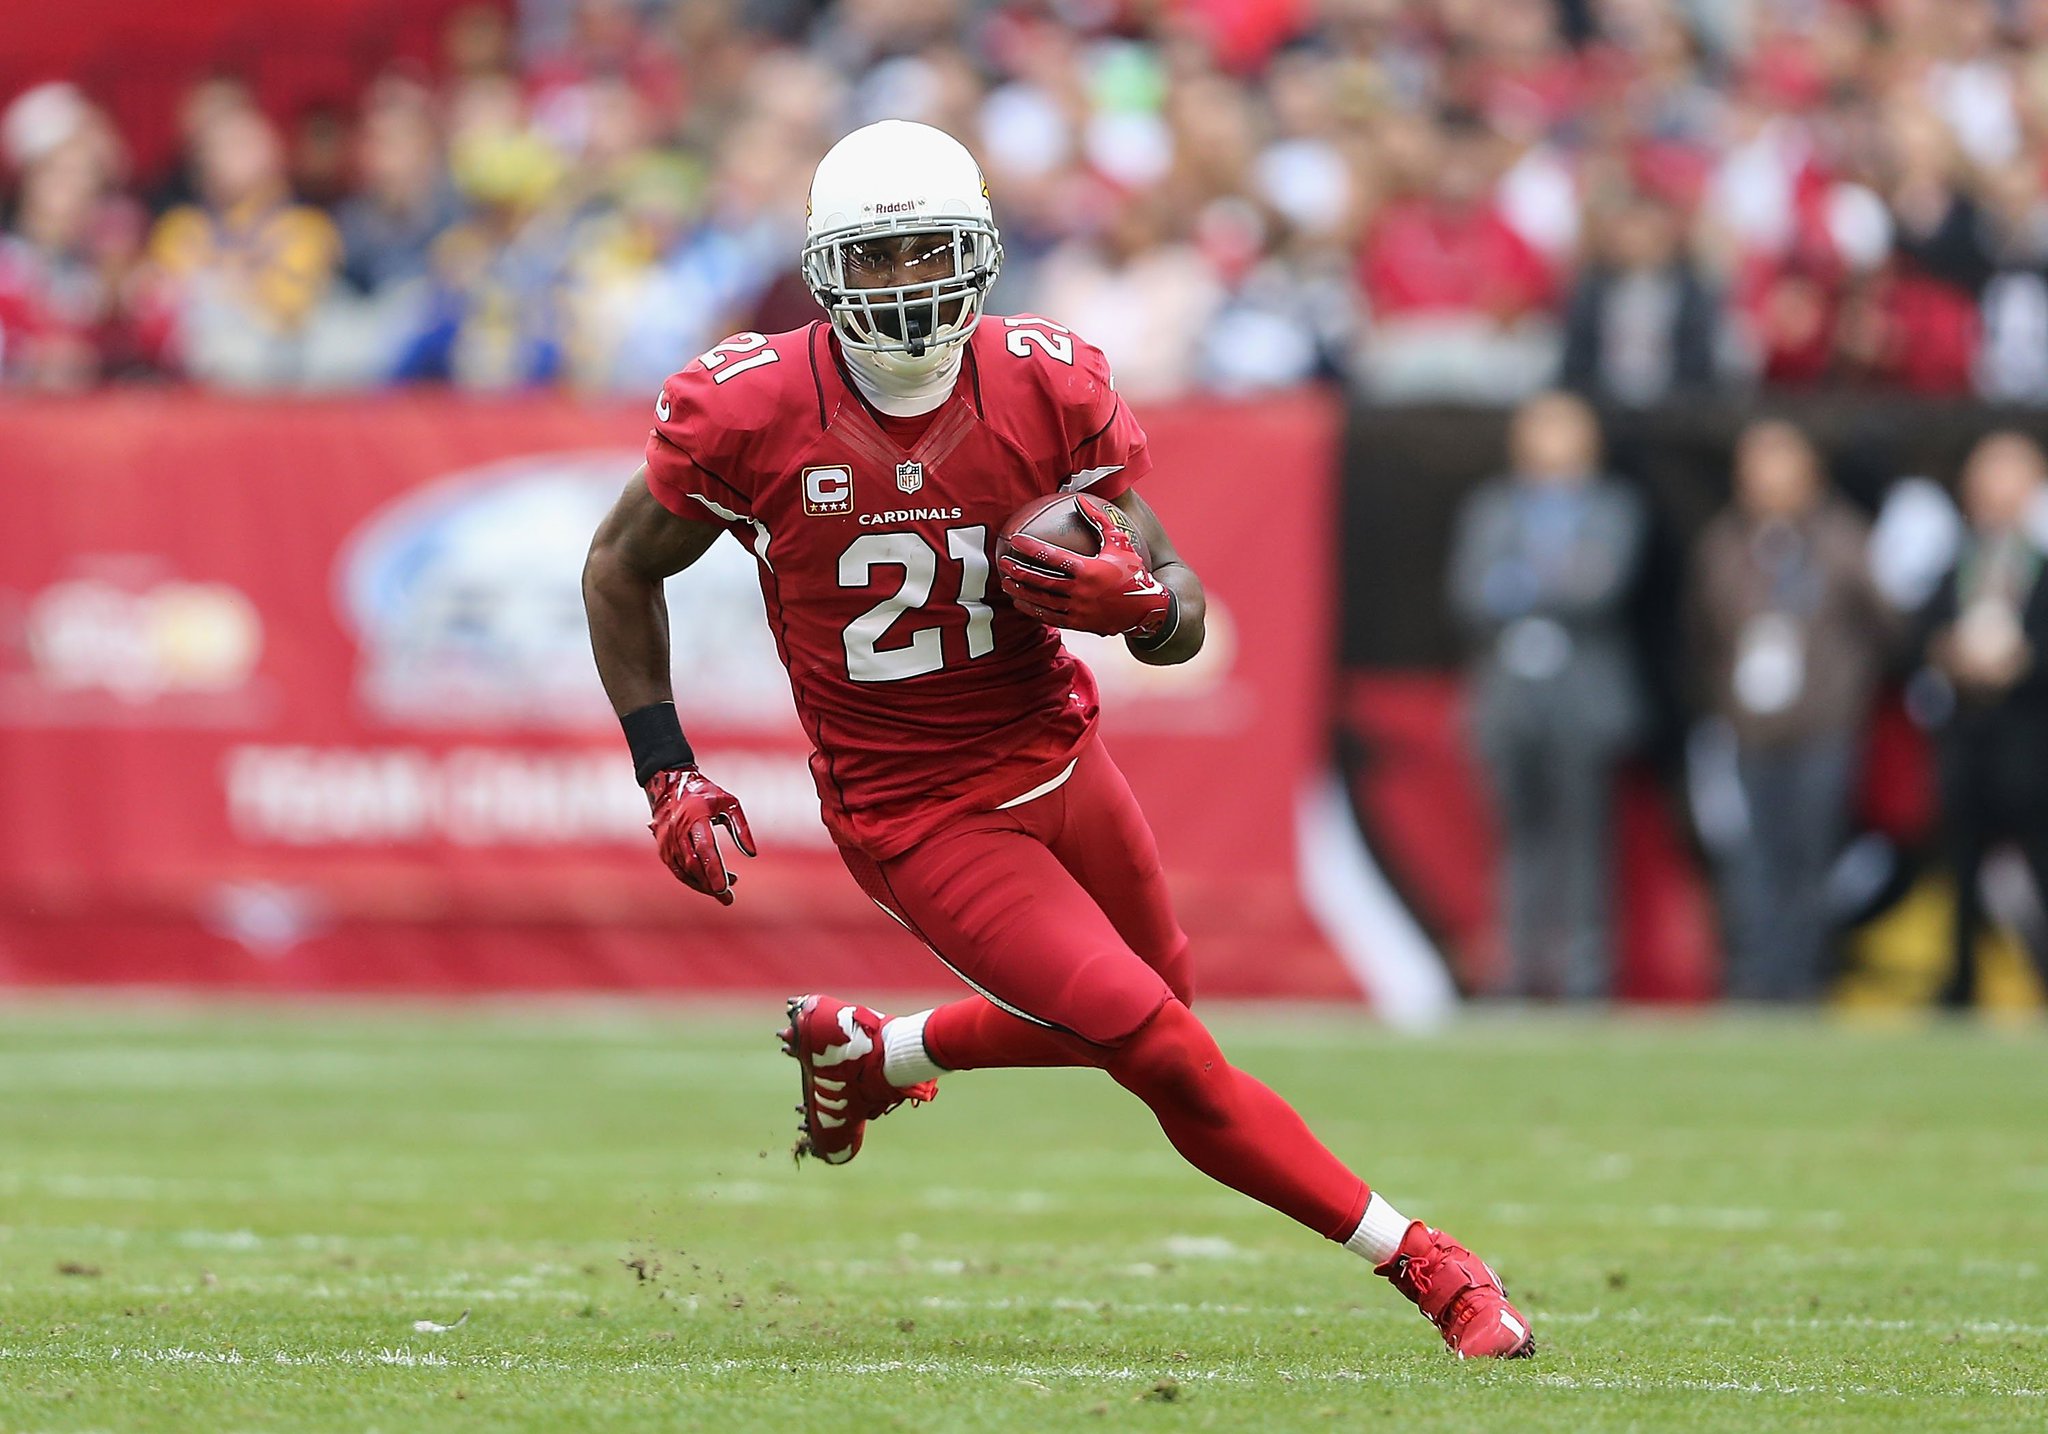 Happy Birthday to Patrick Peterson who turns 27 today! 